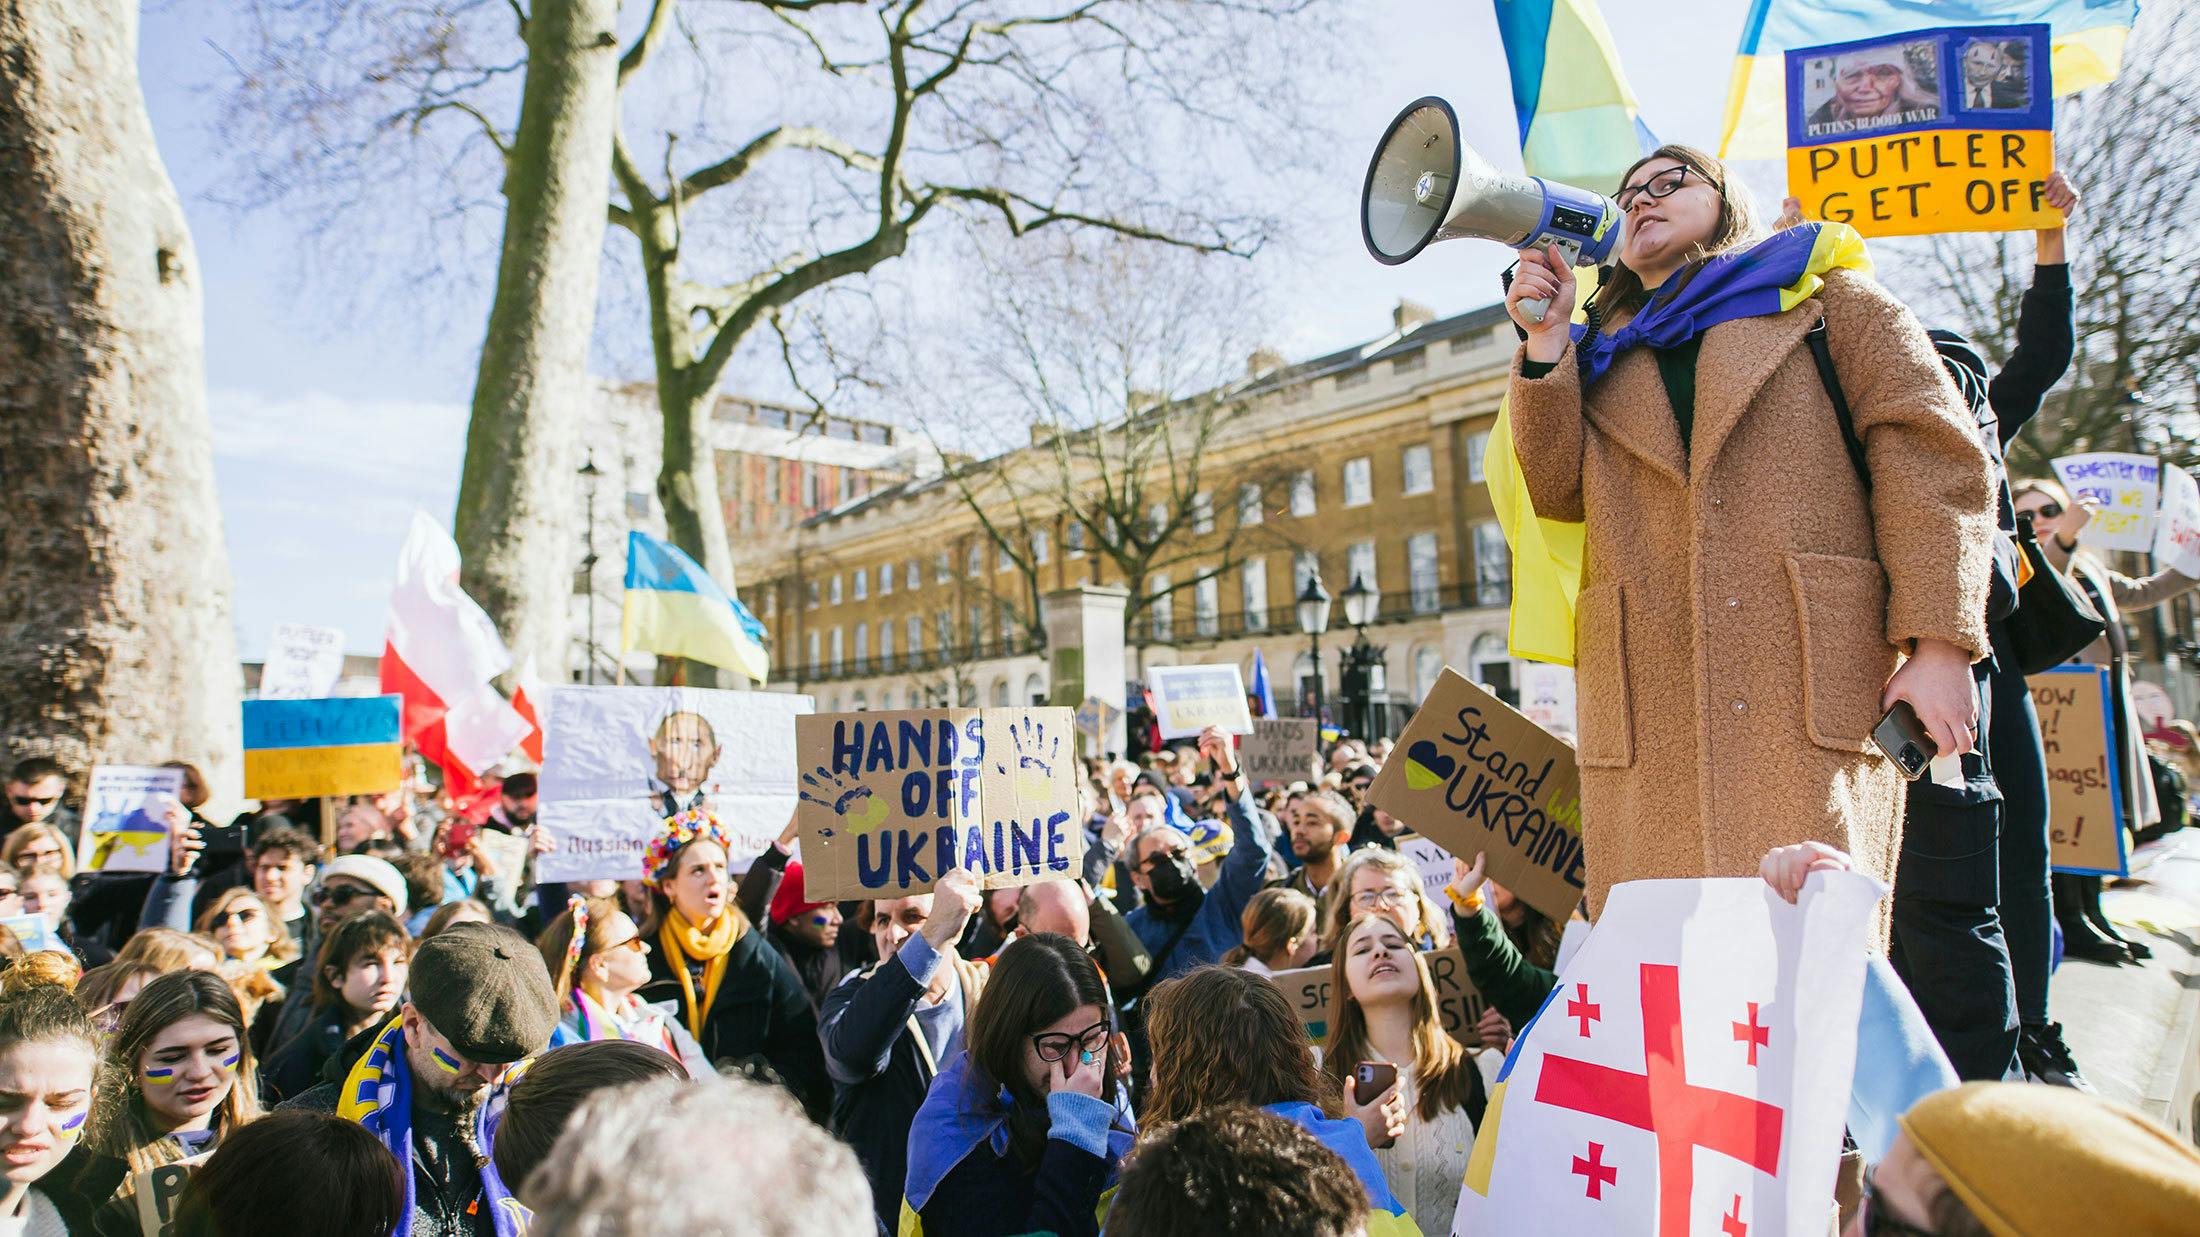 In pictures: The solidarity with Ukraine protest in London